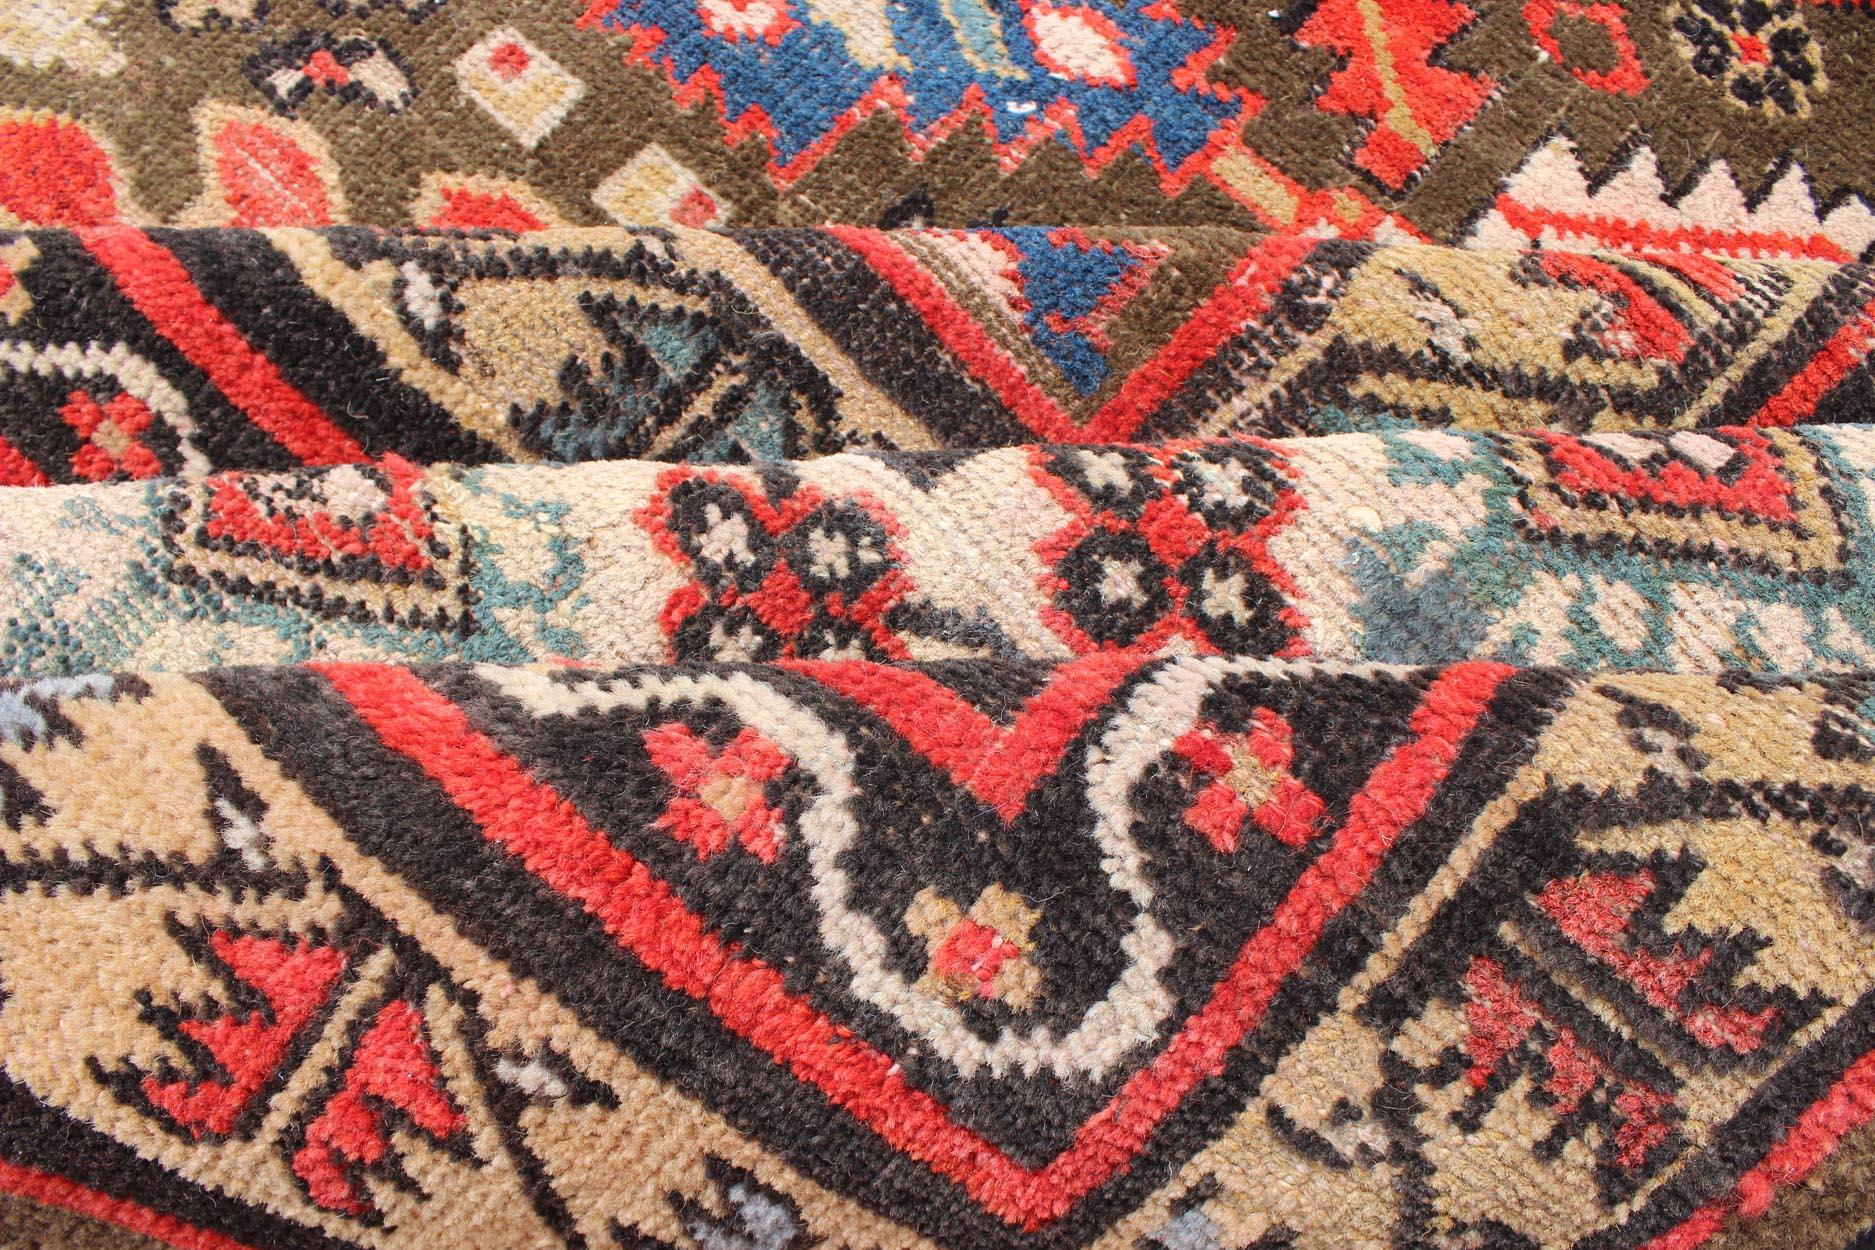 Large Antique Kurdish Rug with All-Over Design in Brown/Green, Red, and Blue For Sale 2